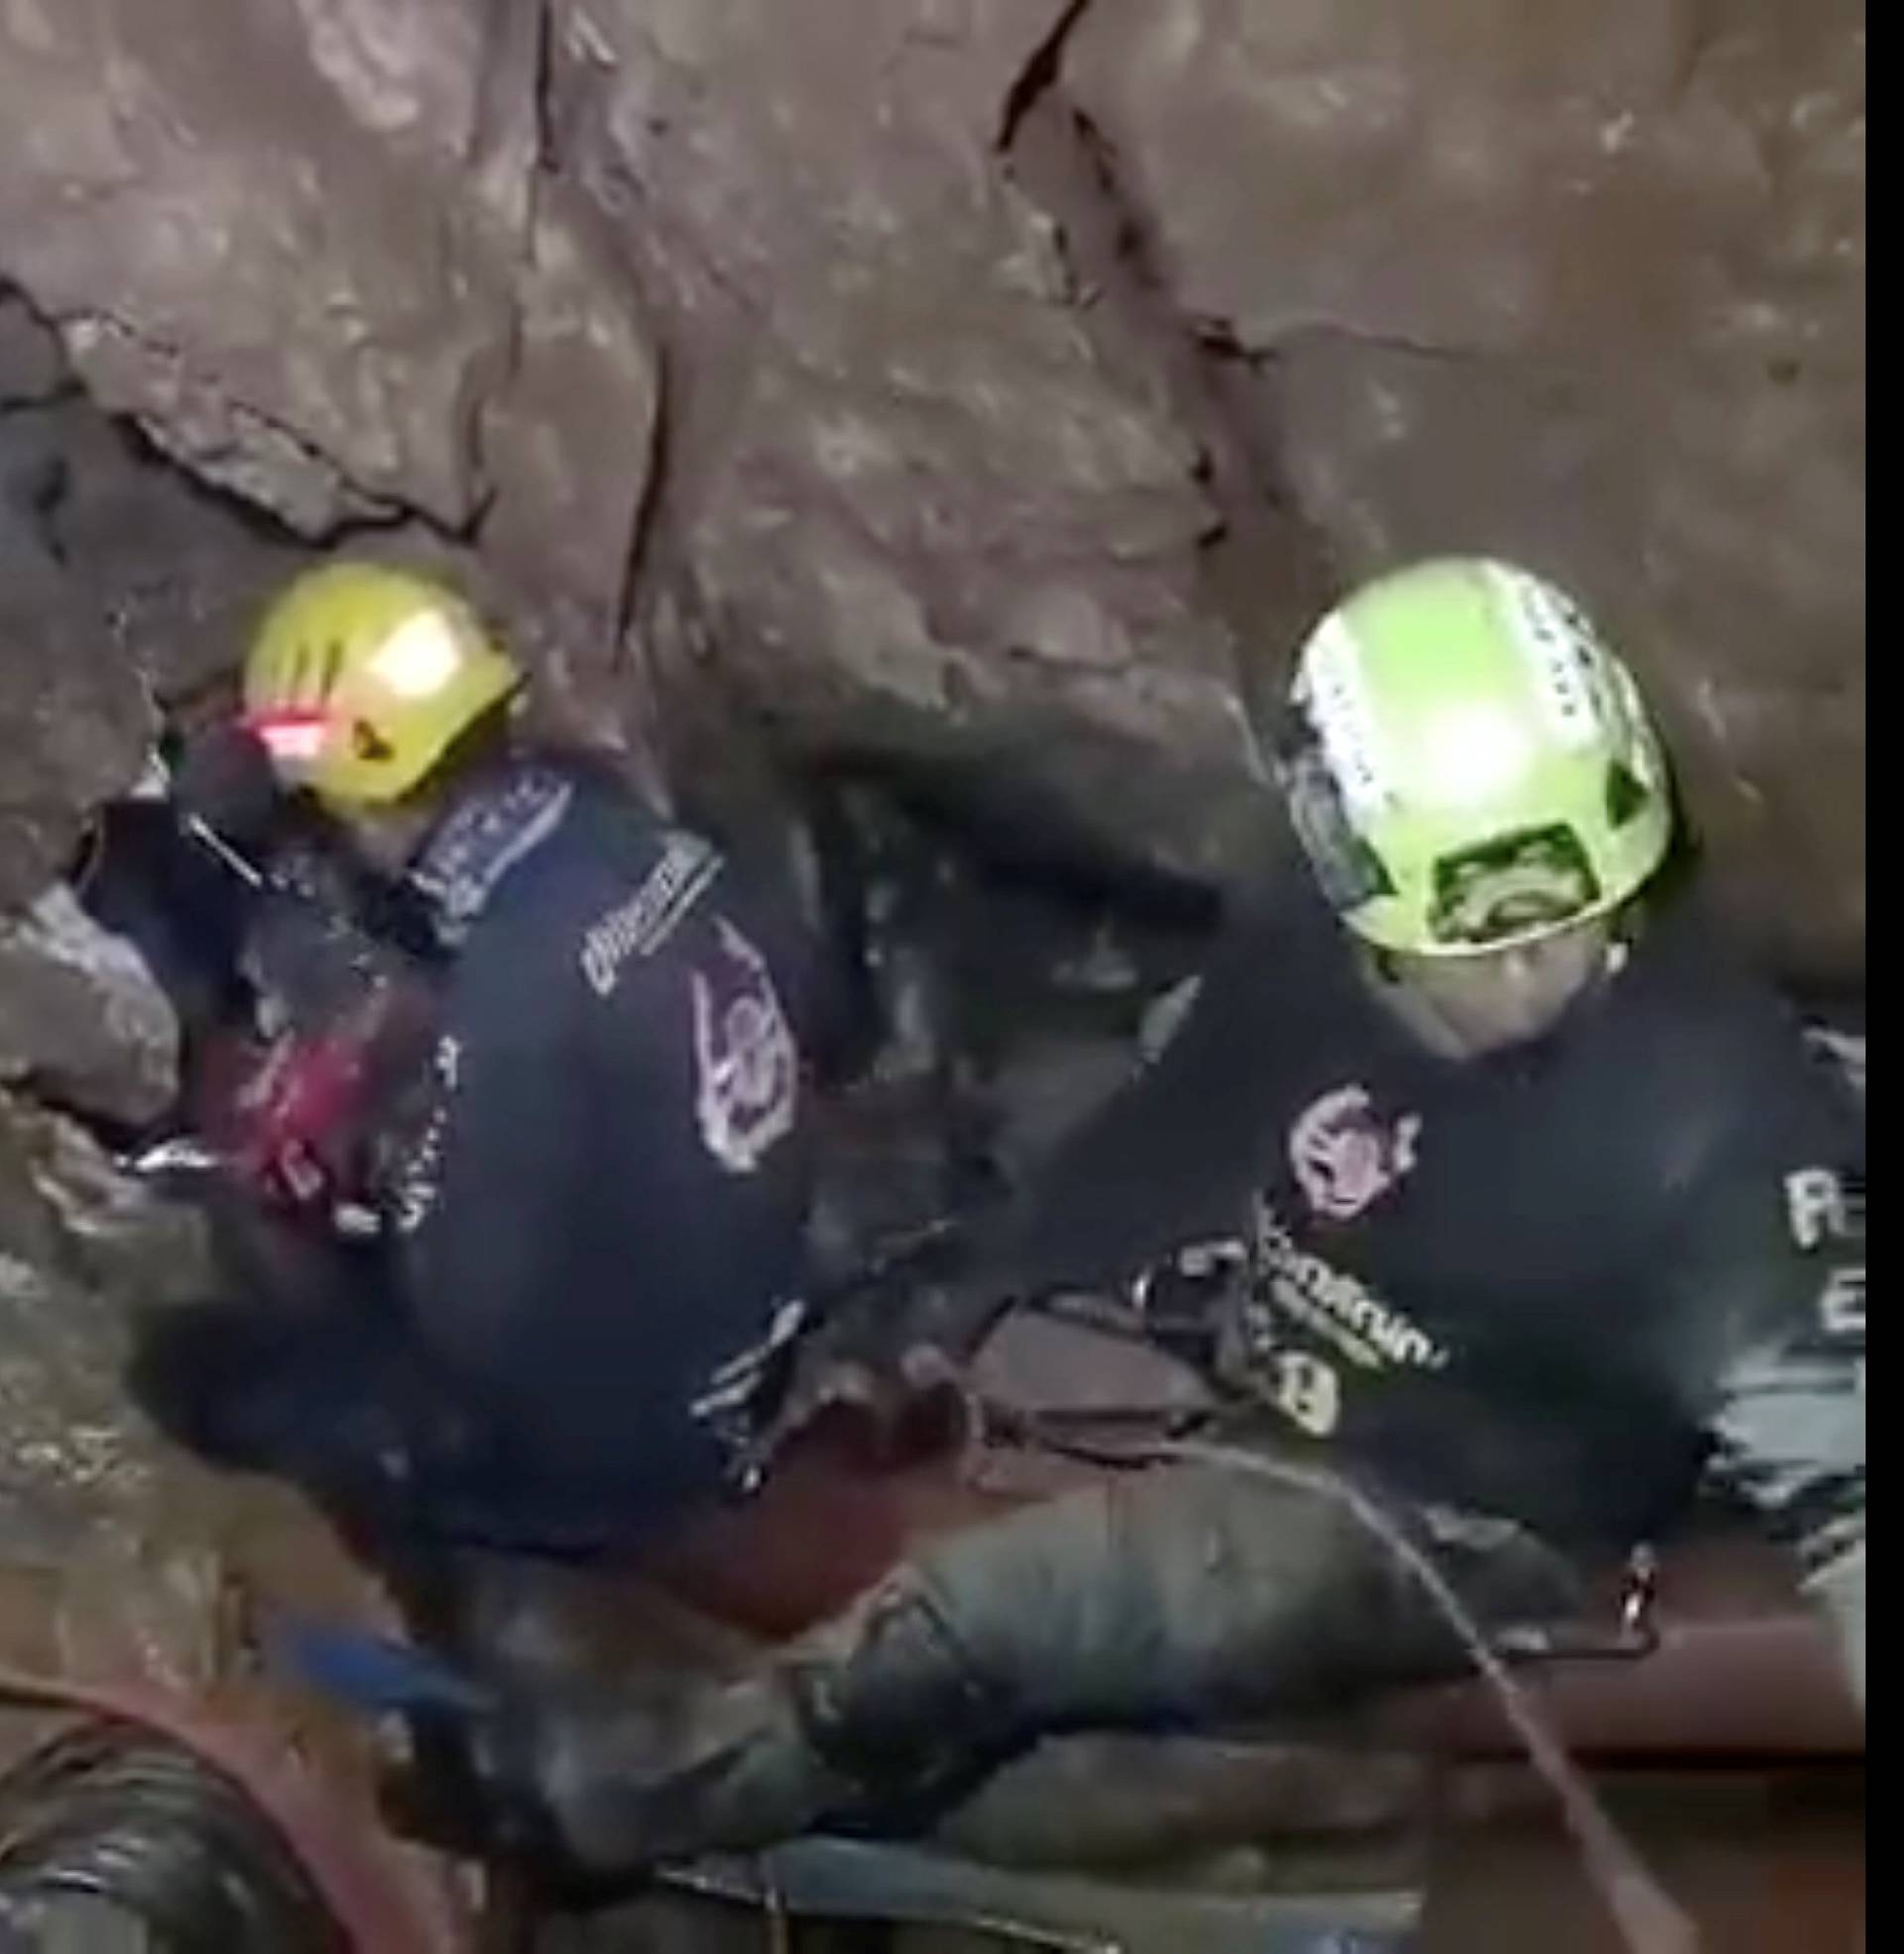 Ruamkatanyu Foundation rescuers are seen trying to find alternative entrance to the Tham Luang cave complex